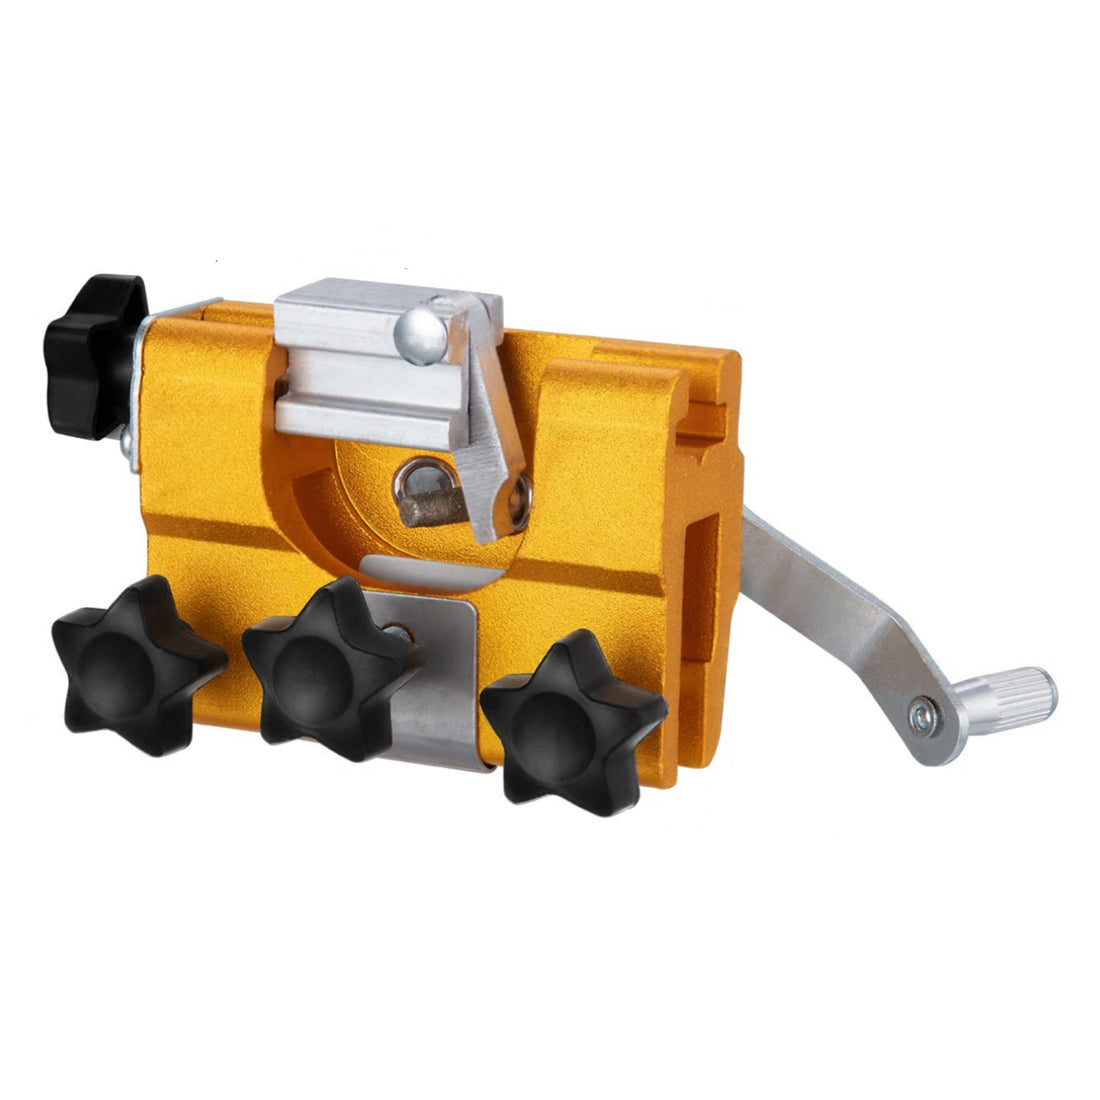 Chainsaw Sharpener, Chainsaw Sharpening Jig, Portable Hand Crank Chainsaw Sharpeners with 3 Grinding Heads,Suitable for All Kinds of Chain Saws and Electric Saws